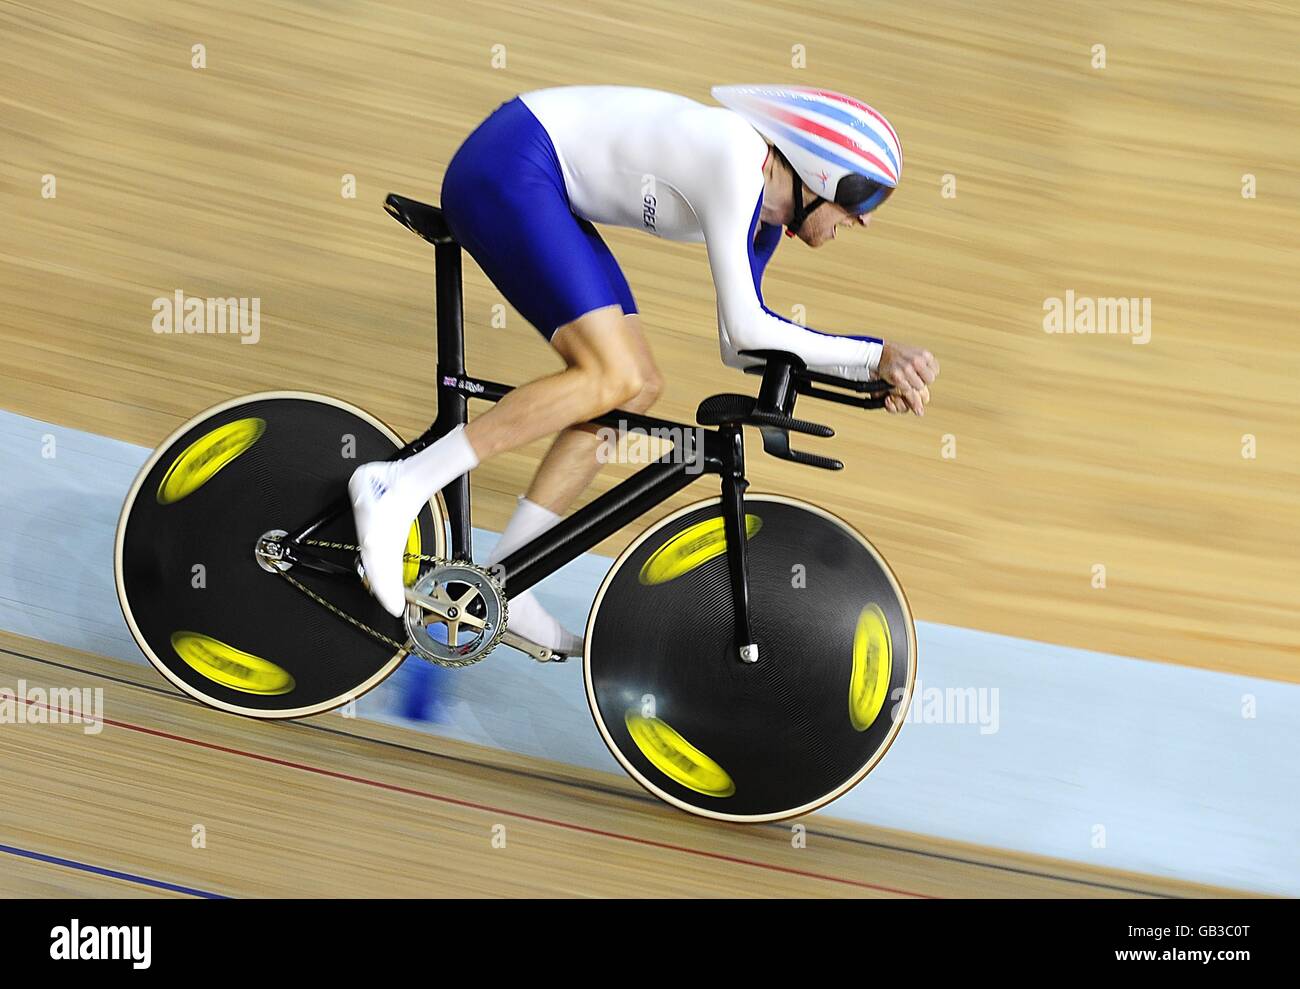 Great Britain's Bradley Wiggins competes in the Men's Individual Pursuit Qualifying at the Laoshan Velodrome on day 7 of the 2008 Olympic Games in Beijing. Stock Photo